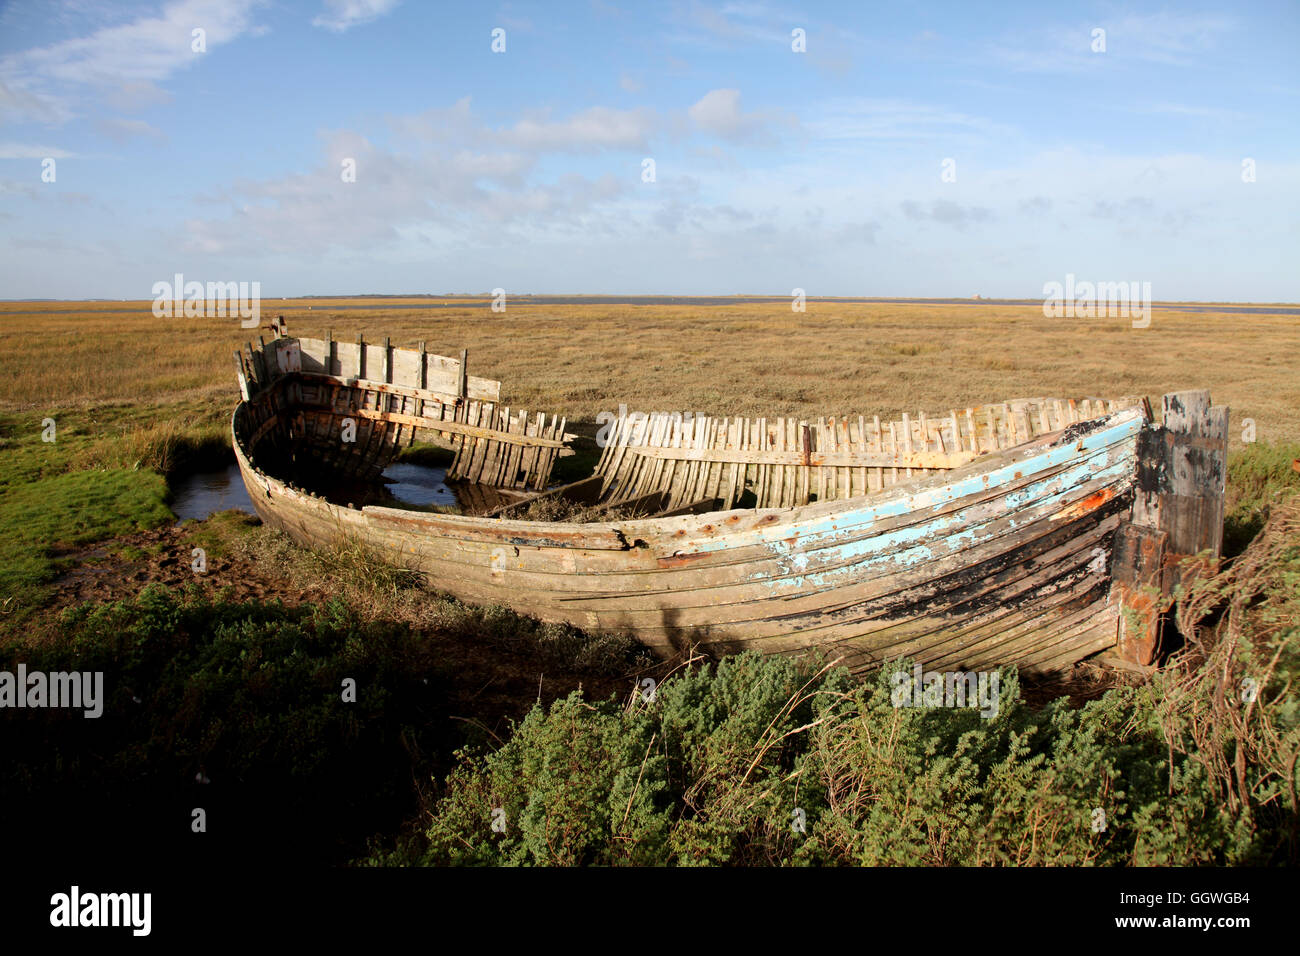 An old wrecked whaler lies in the saltmarshes in East Anglia, England amongst a bleak and empty landscape Stock Photo